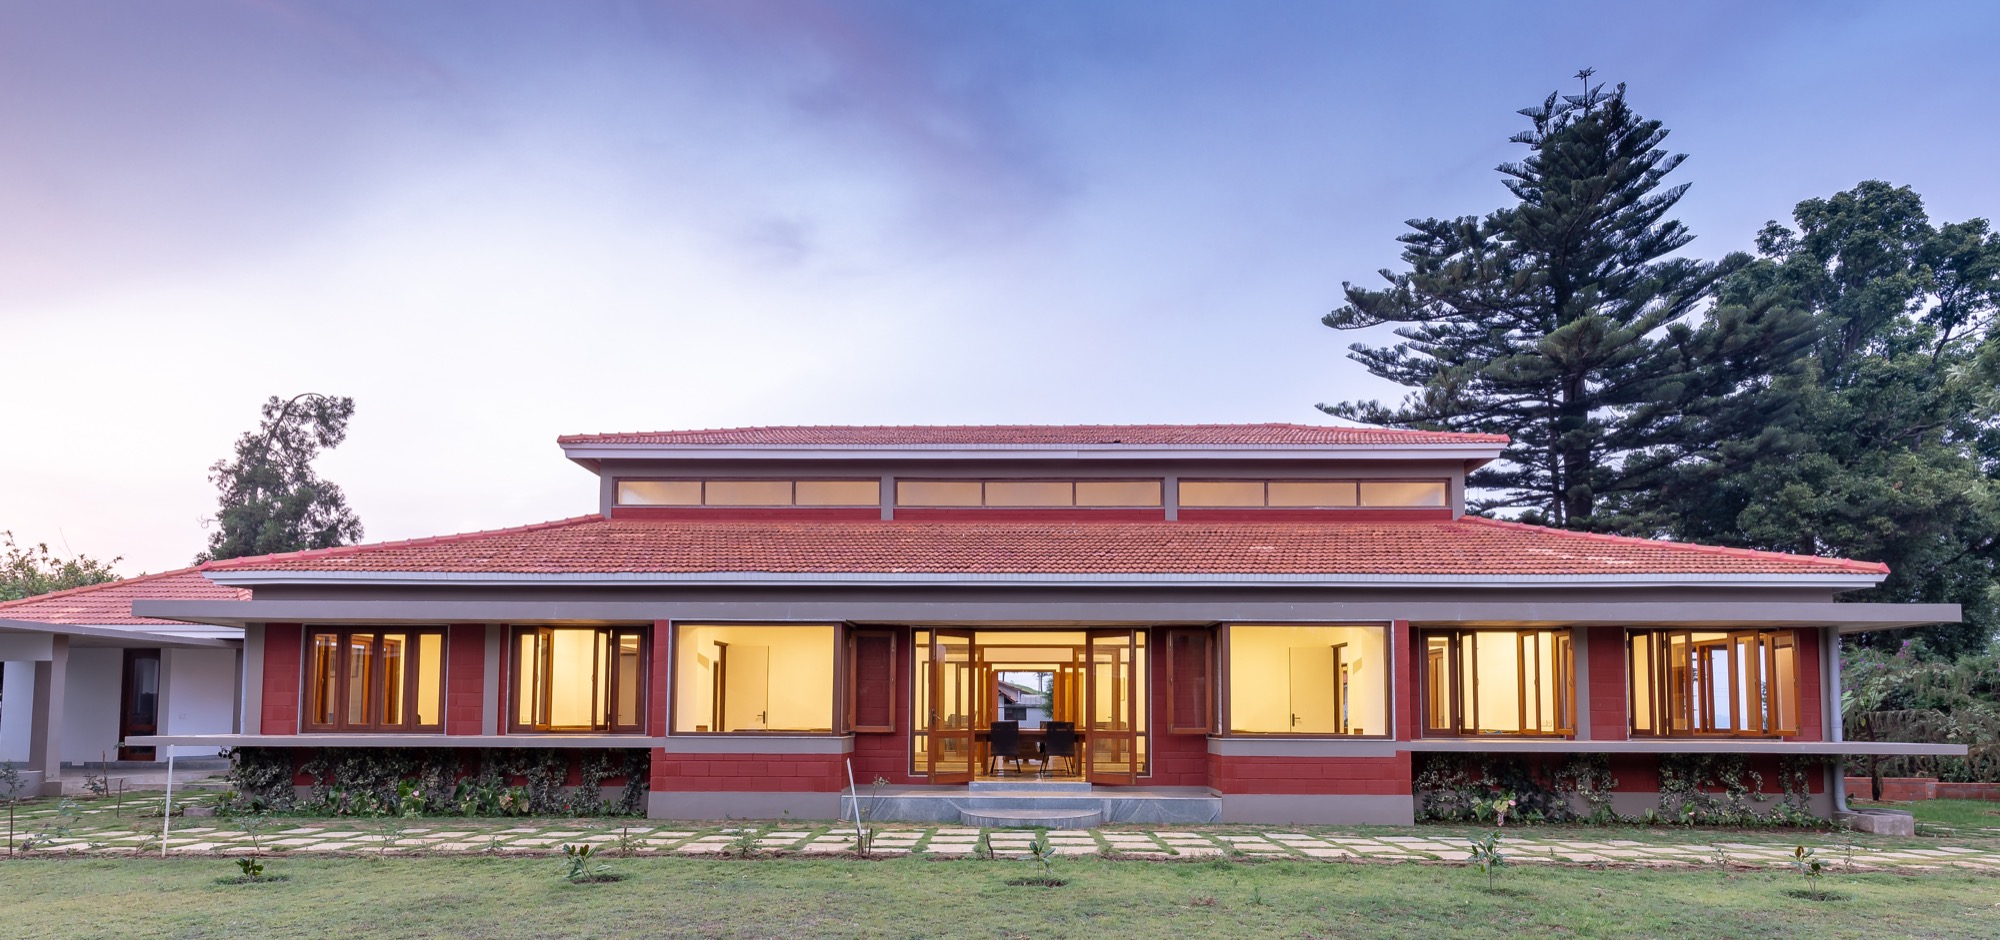 In Pictures: Head office for Coonoor Tea Corporation, by Kaushik Mukherjee Architects 1